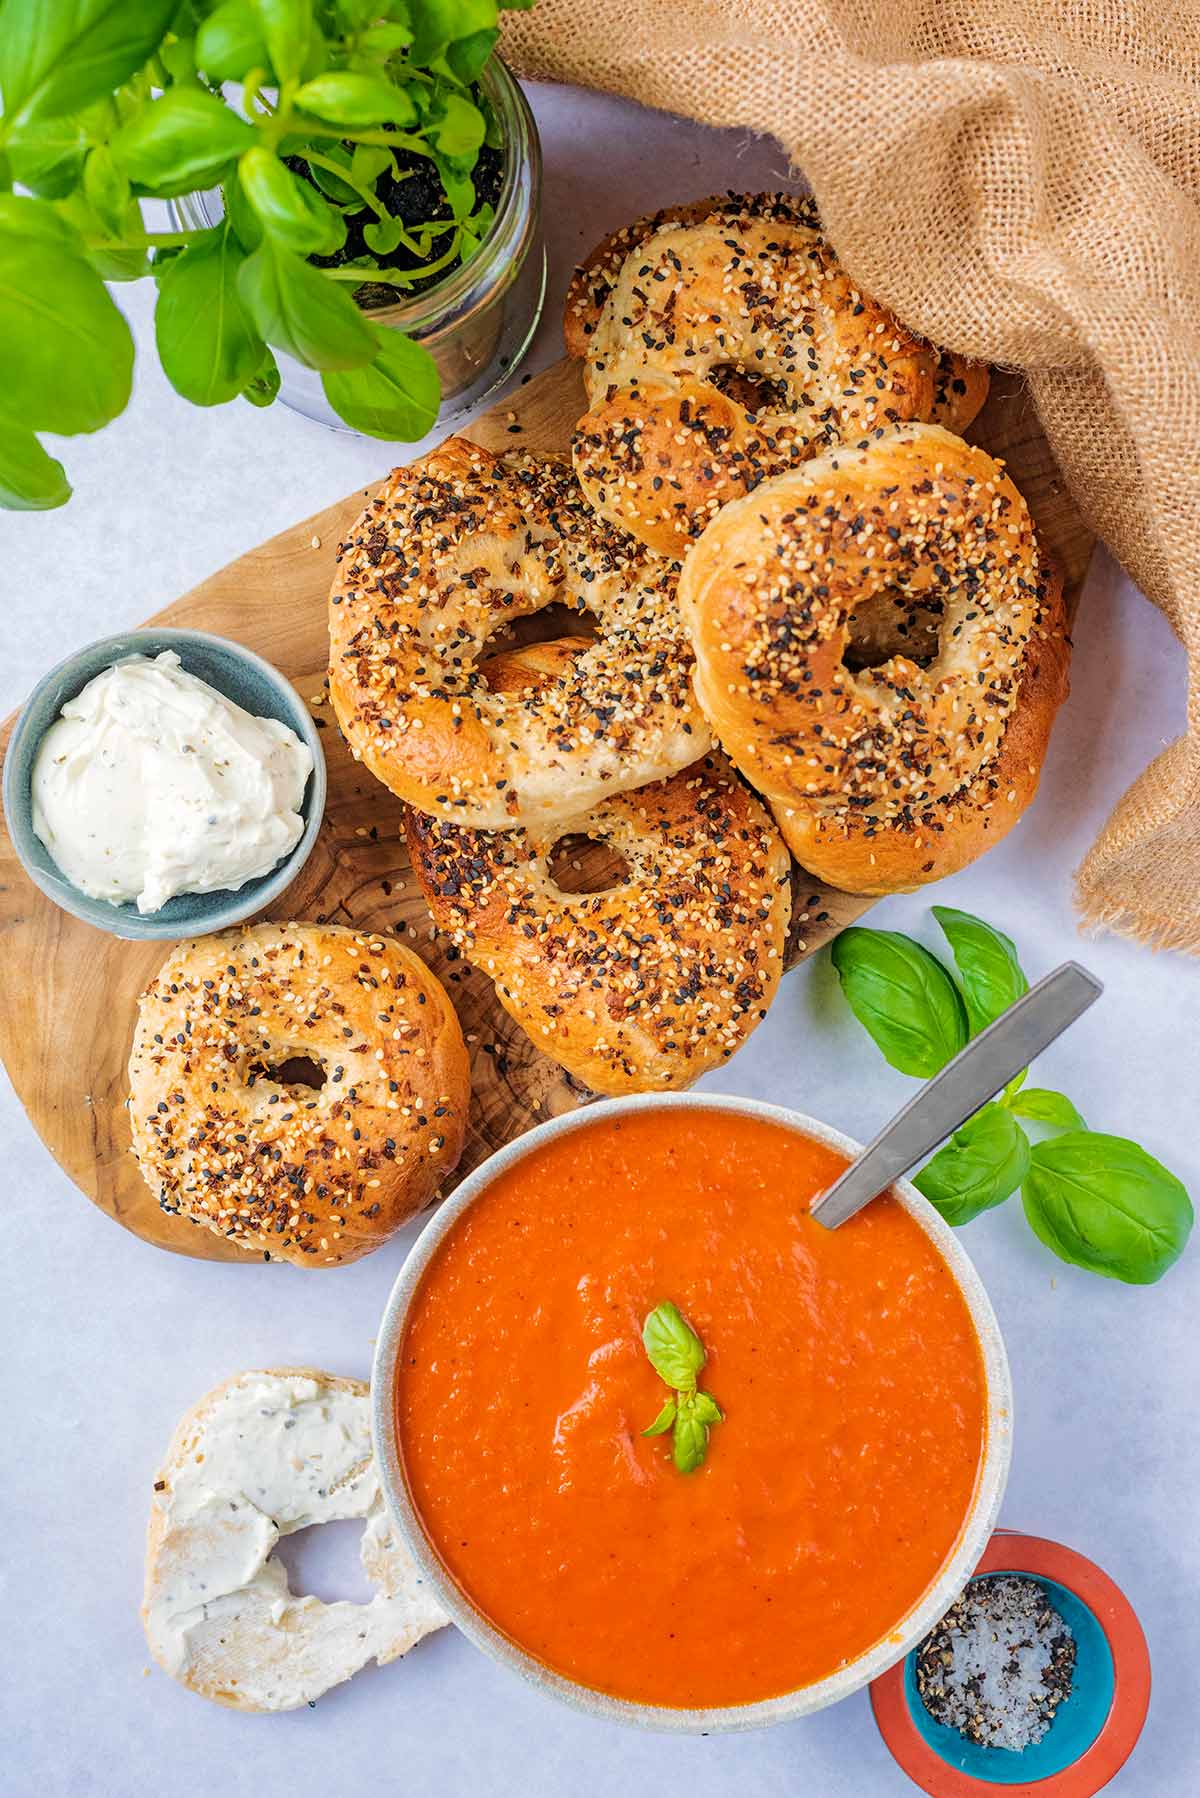 Seeded bagels on a wooden board next to a bowl of tomato soup.